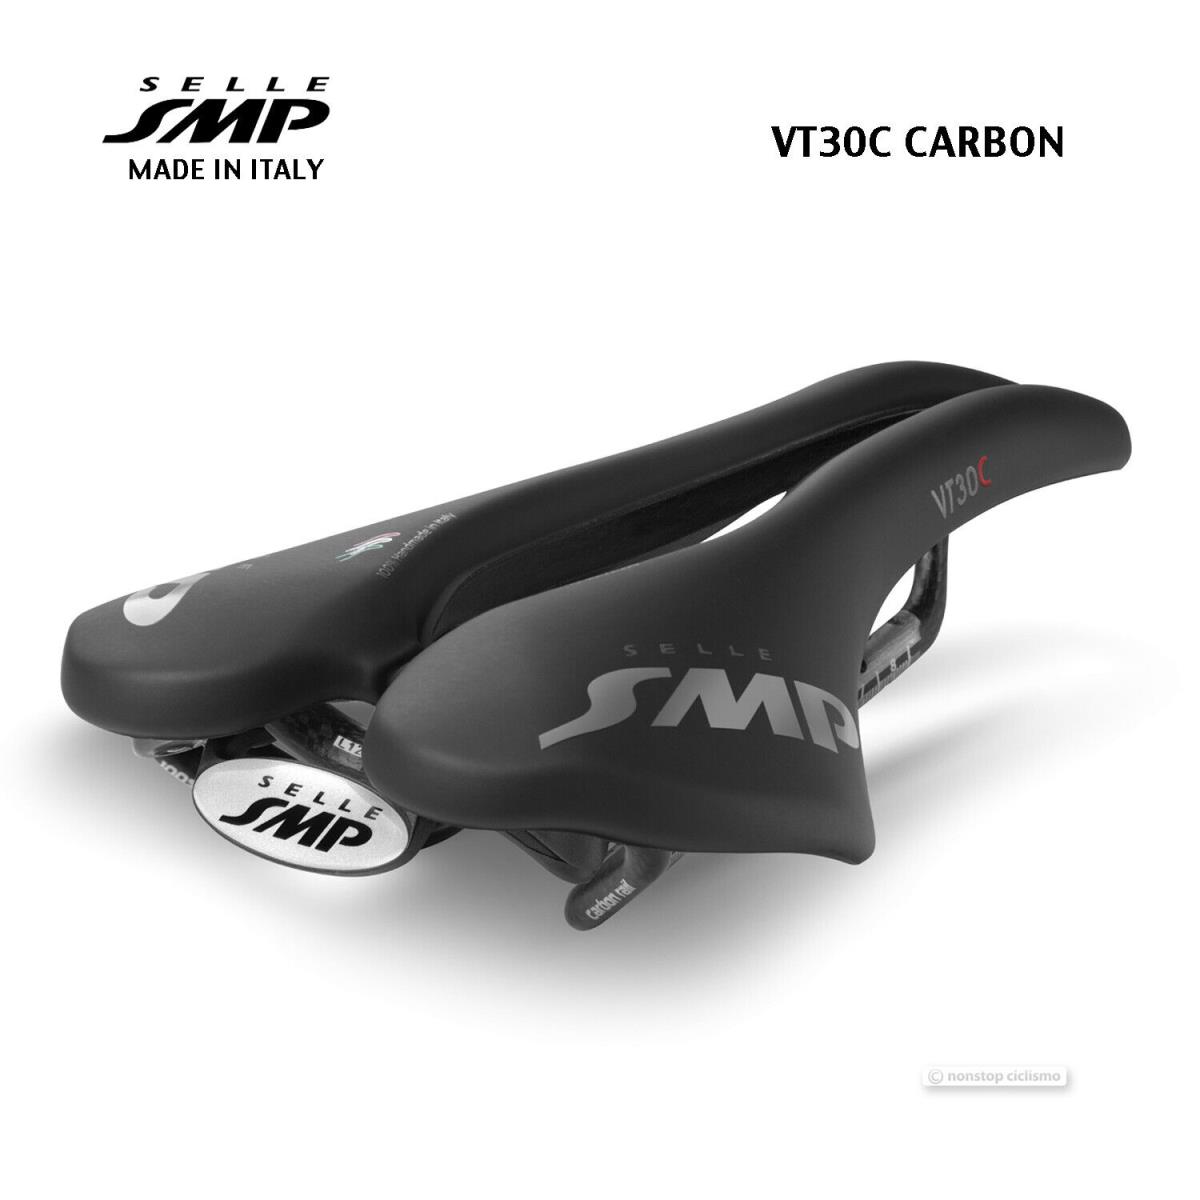 Selle Smp VT30C Carbon Saddle : Velvet Touch Black - Made IN Italy